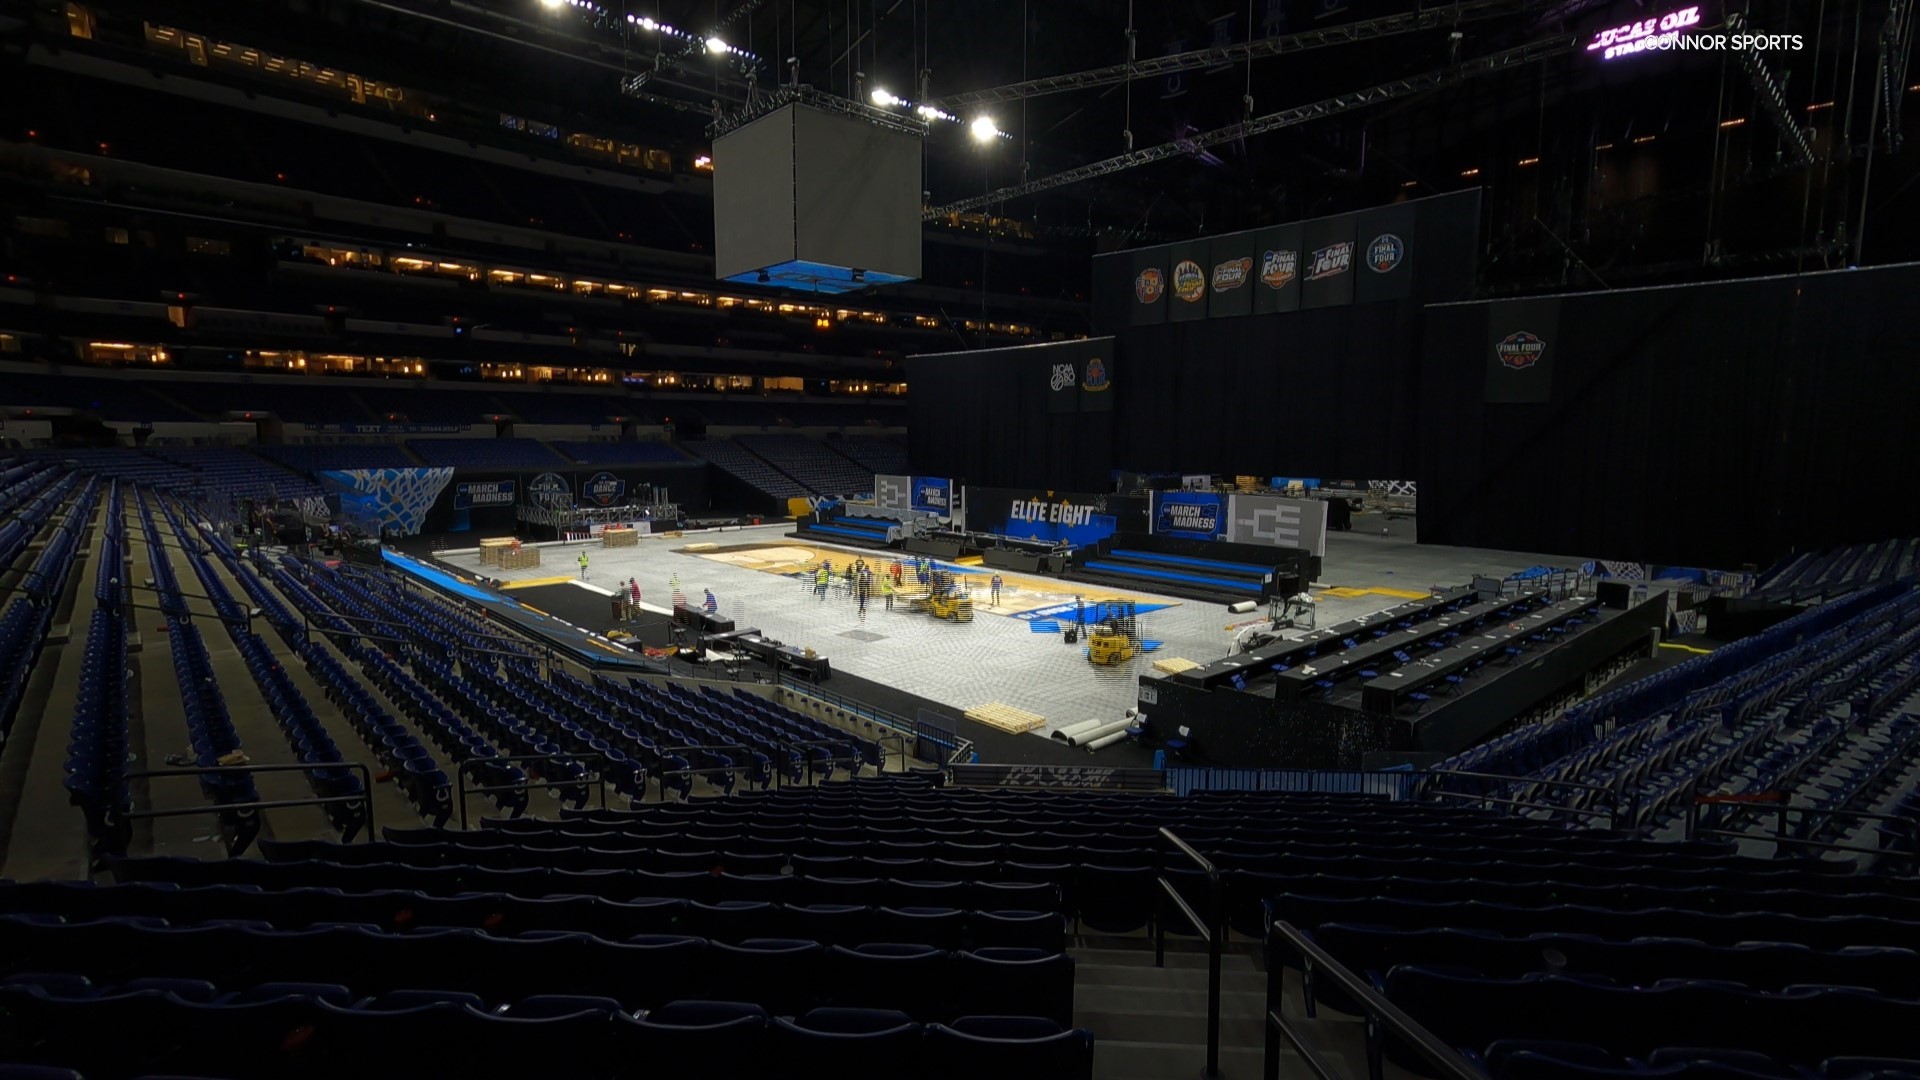 Nearly 400 panels weighing a total of 60,000 pounds slide together like a puzzle to create a basketball court made to perfection for the Final Four.